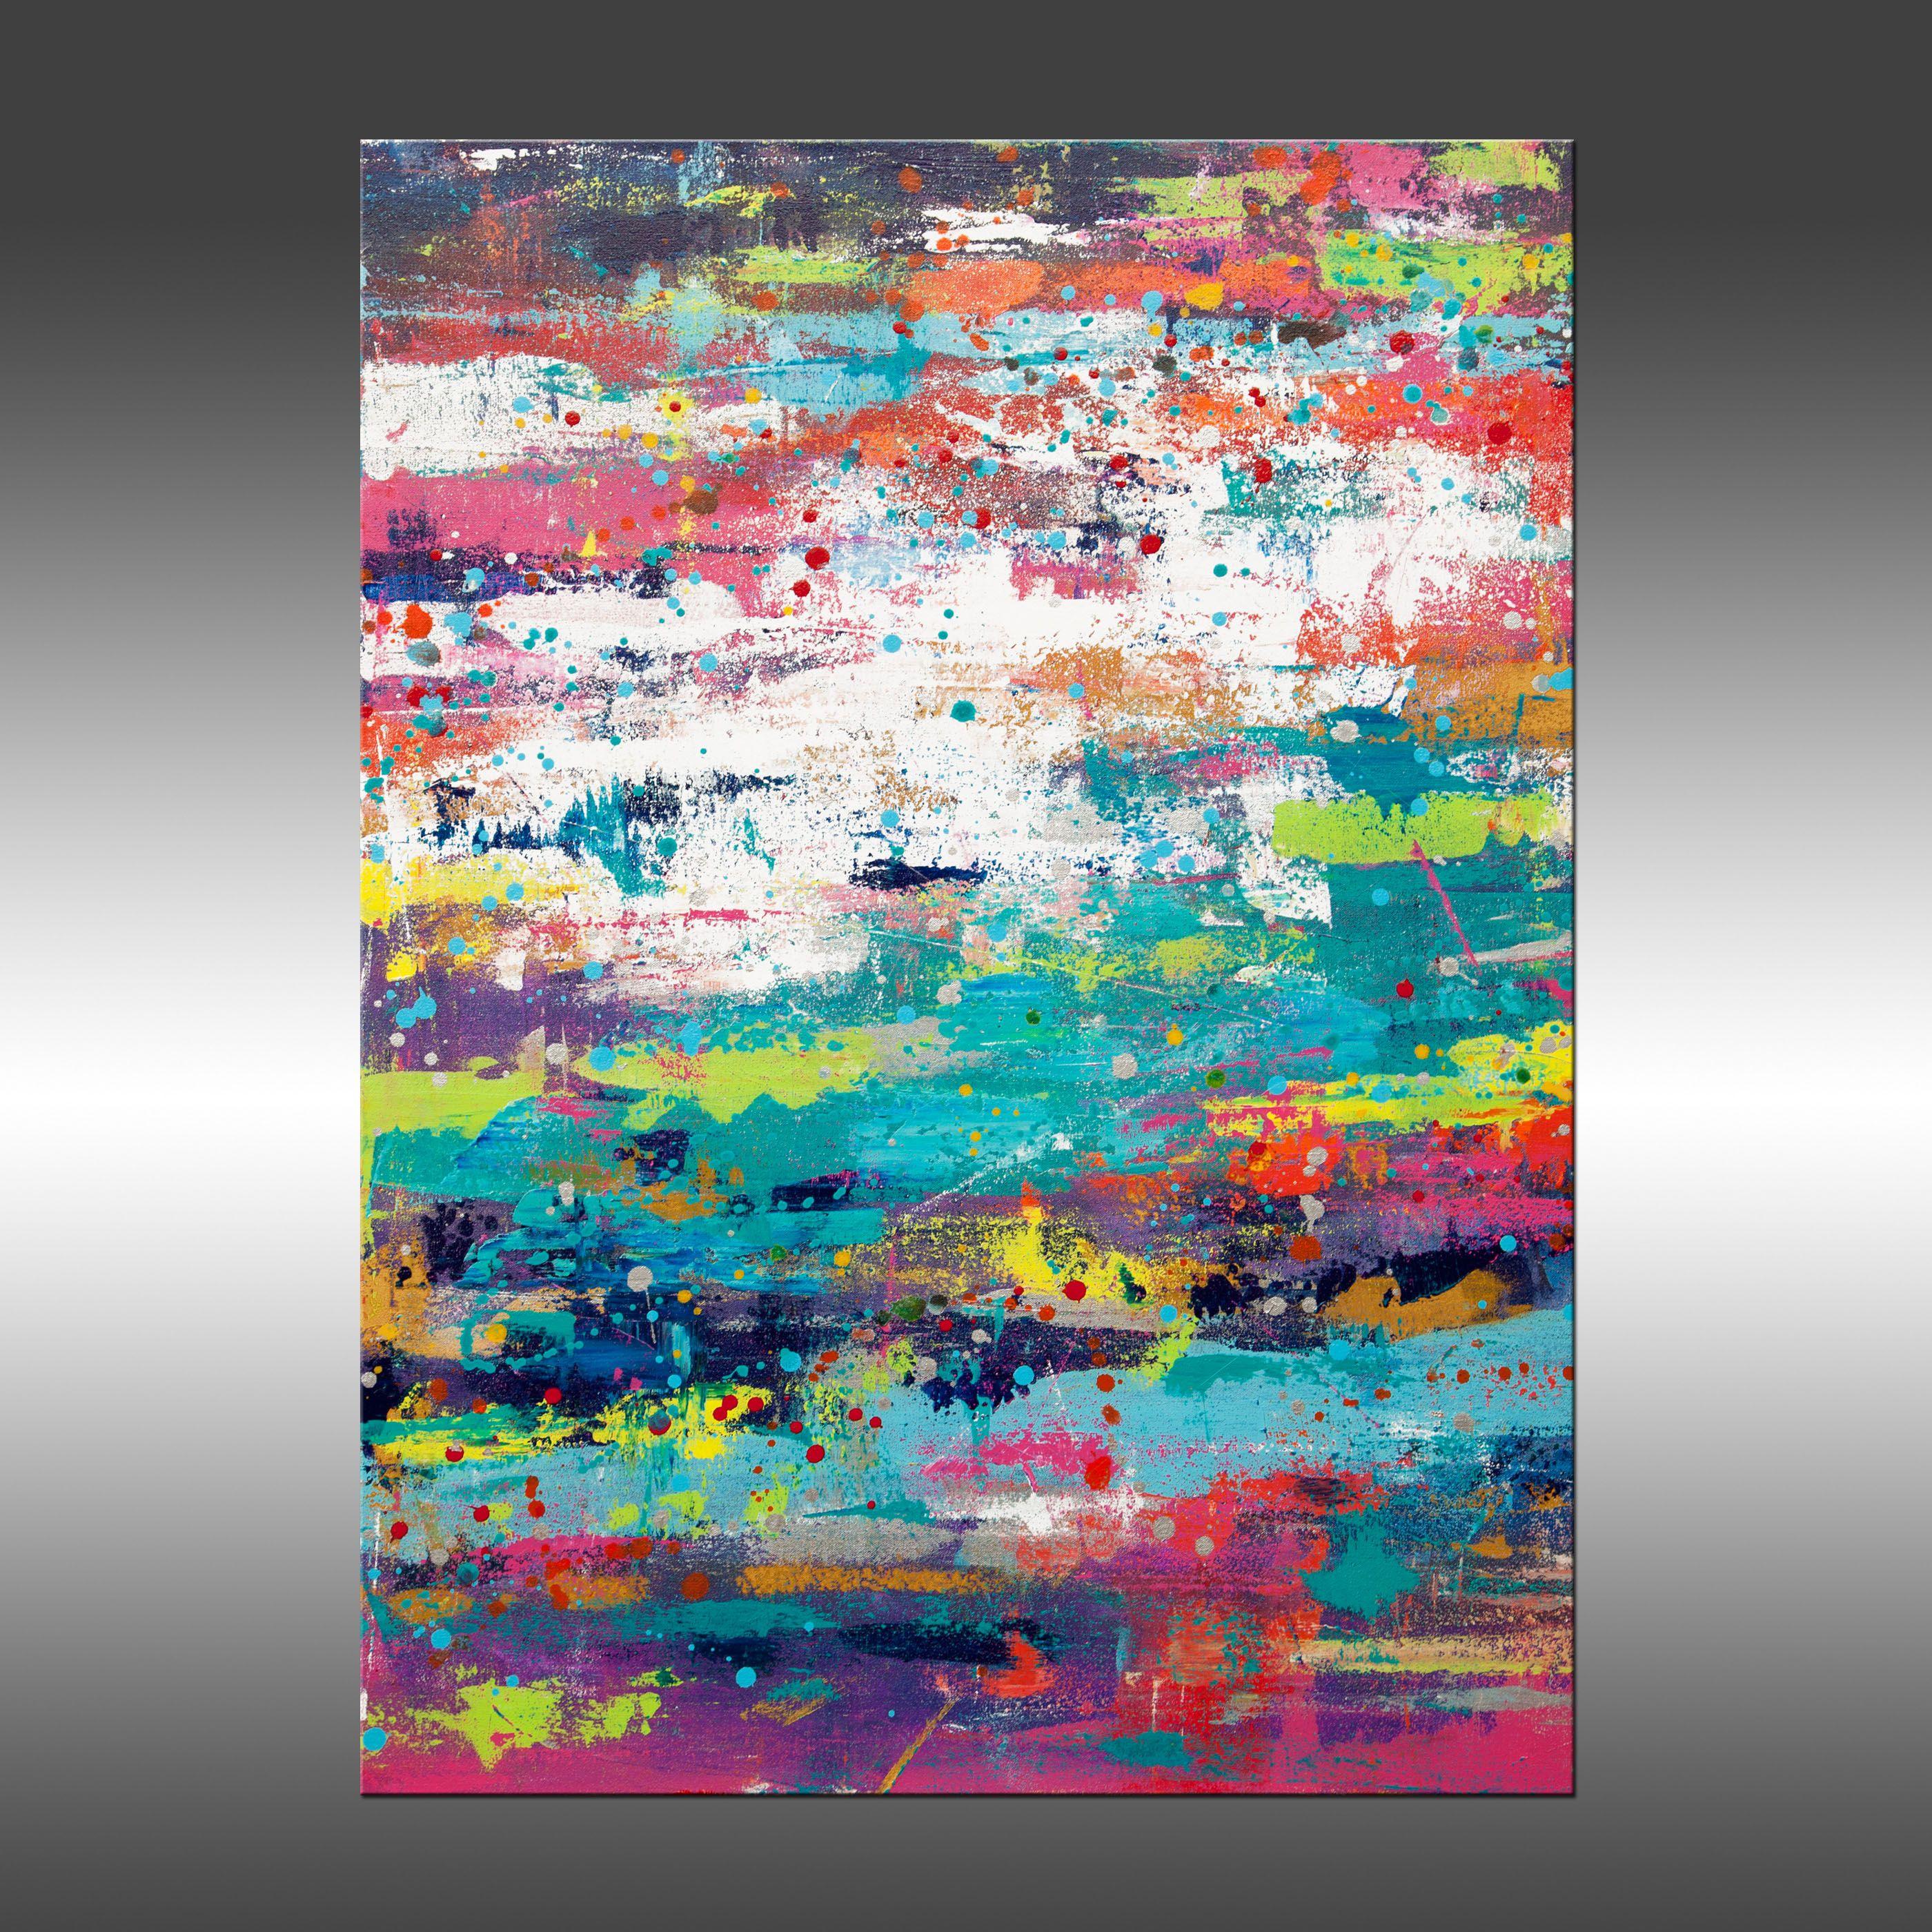 Reclaimed 7 is an original painting, created with acrylic paint on gallery-wrapped canvas. It has a width of 30 inches and a height of 40 inches with a depth of 1.5 inches (30x40x1.5).     The colors used in the painting are white, teal, green,